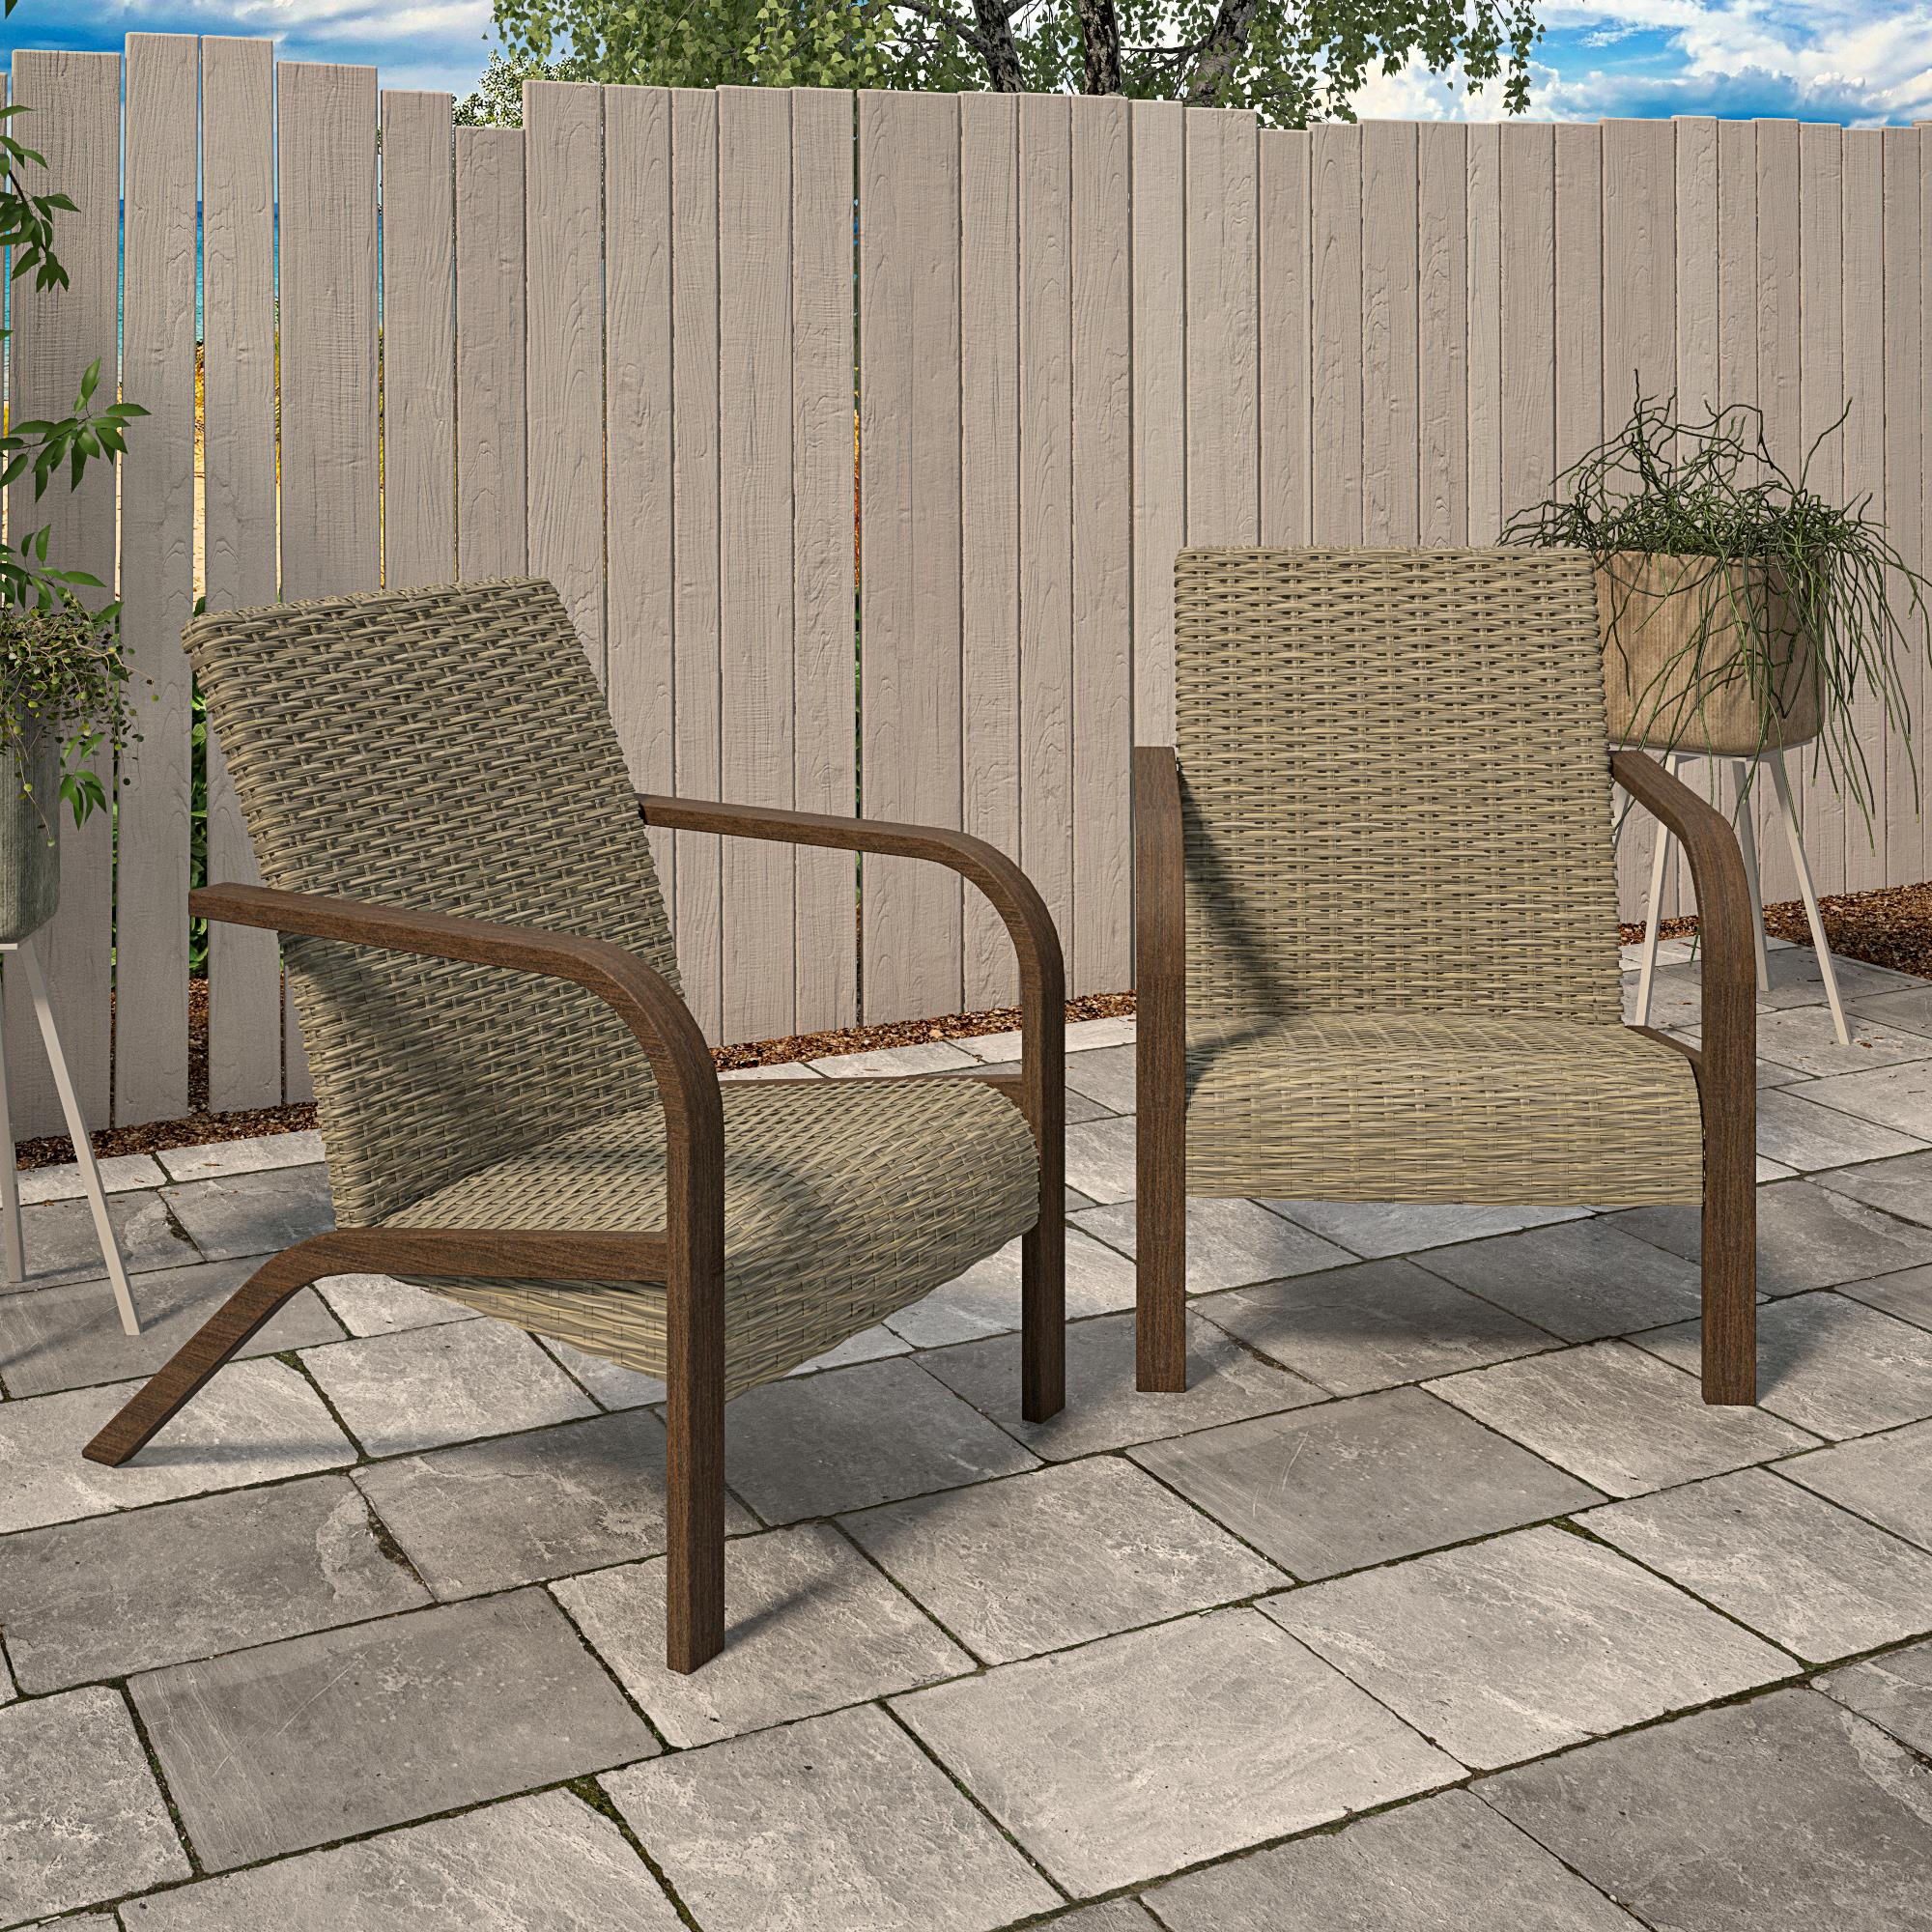 COSCO Outdoor Living, SmartWick, Patio Lounge Chairs, 2-Pack, Warm Gray - image 1 of 9